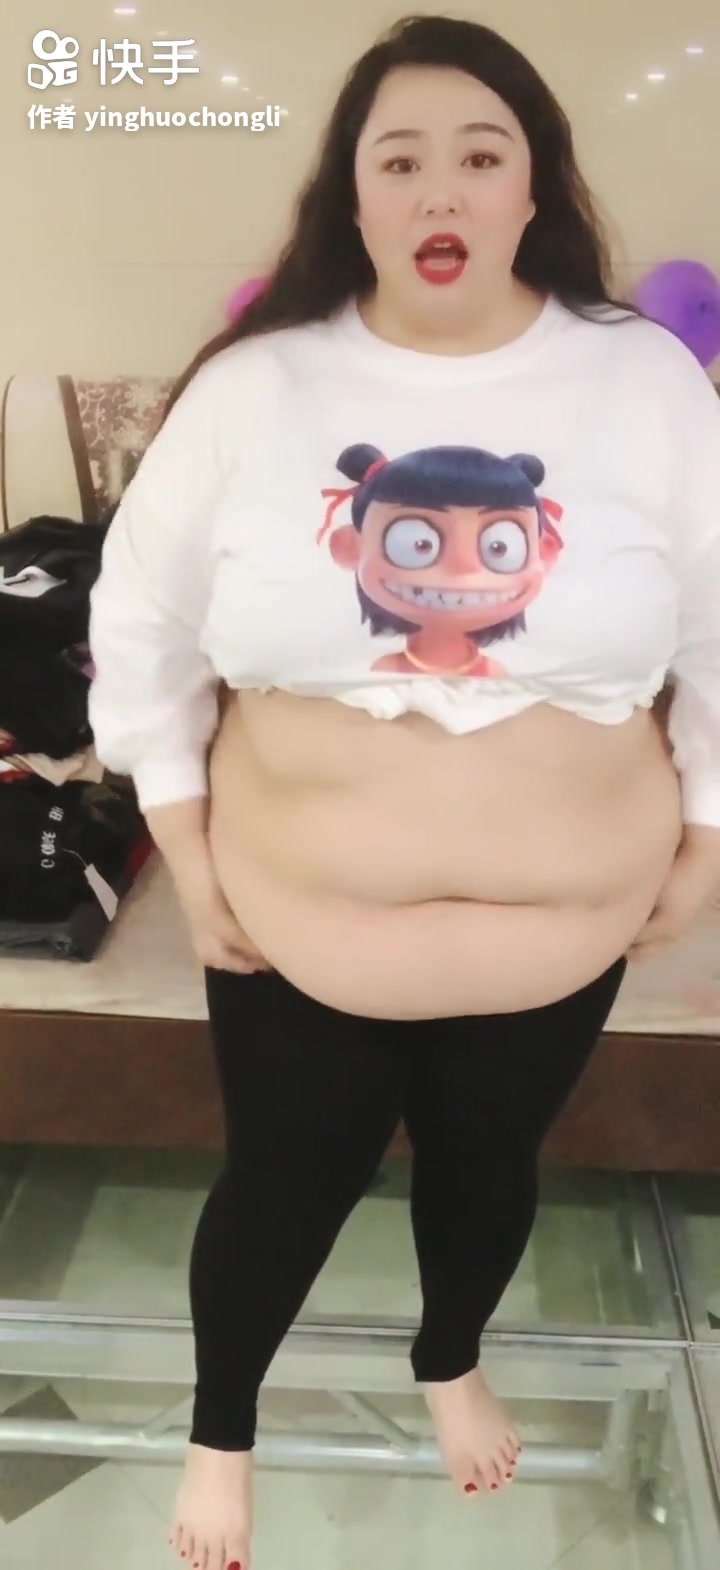 Fat Chinese Woman Shows Hanging Belly